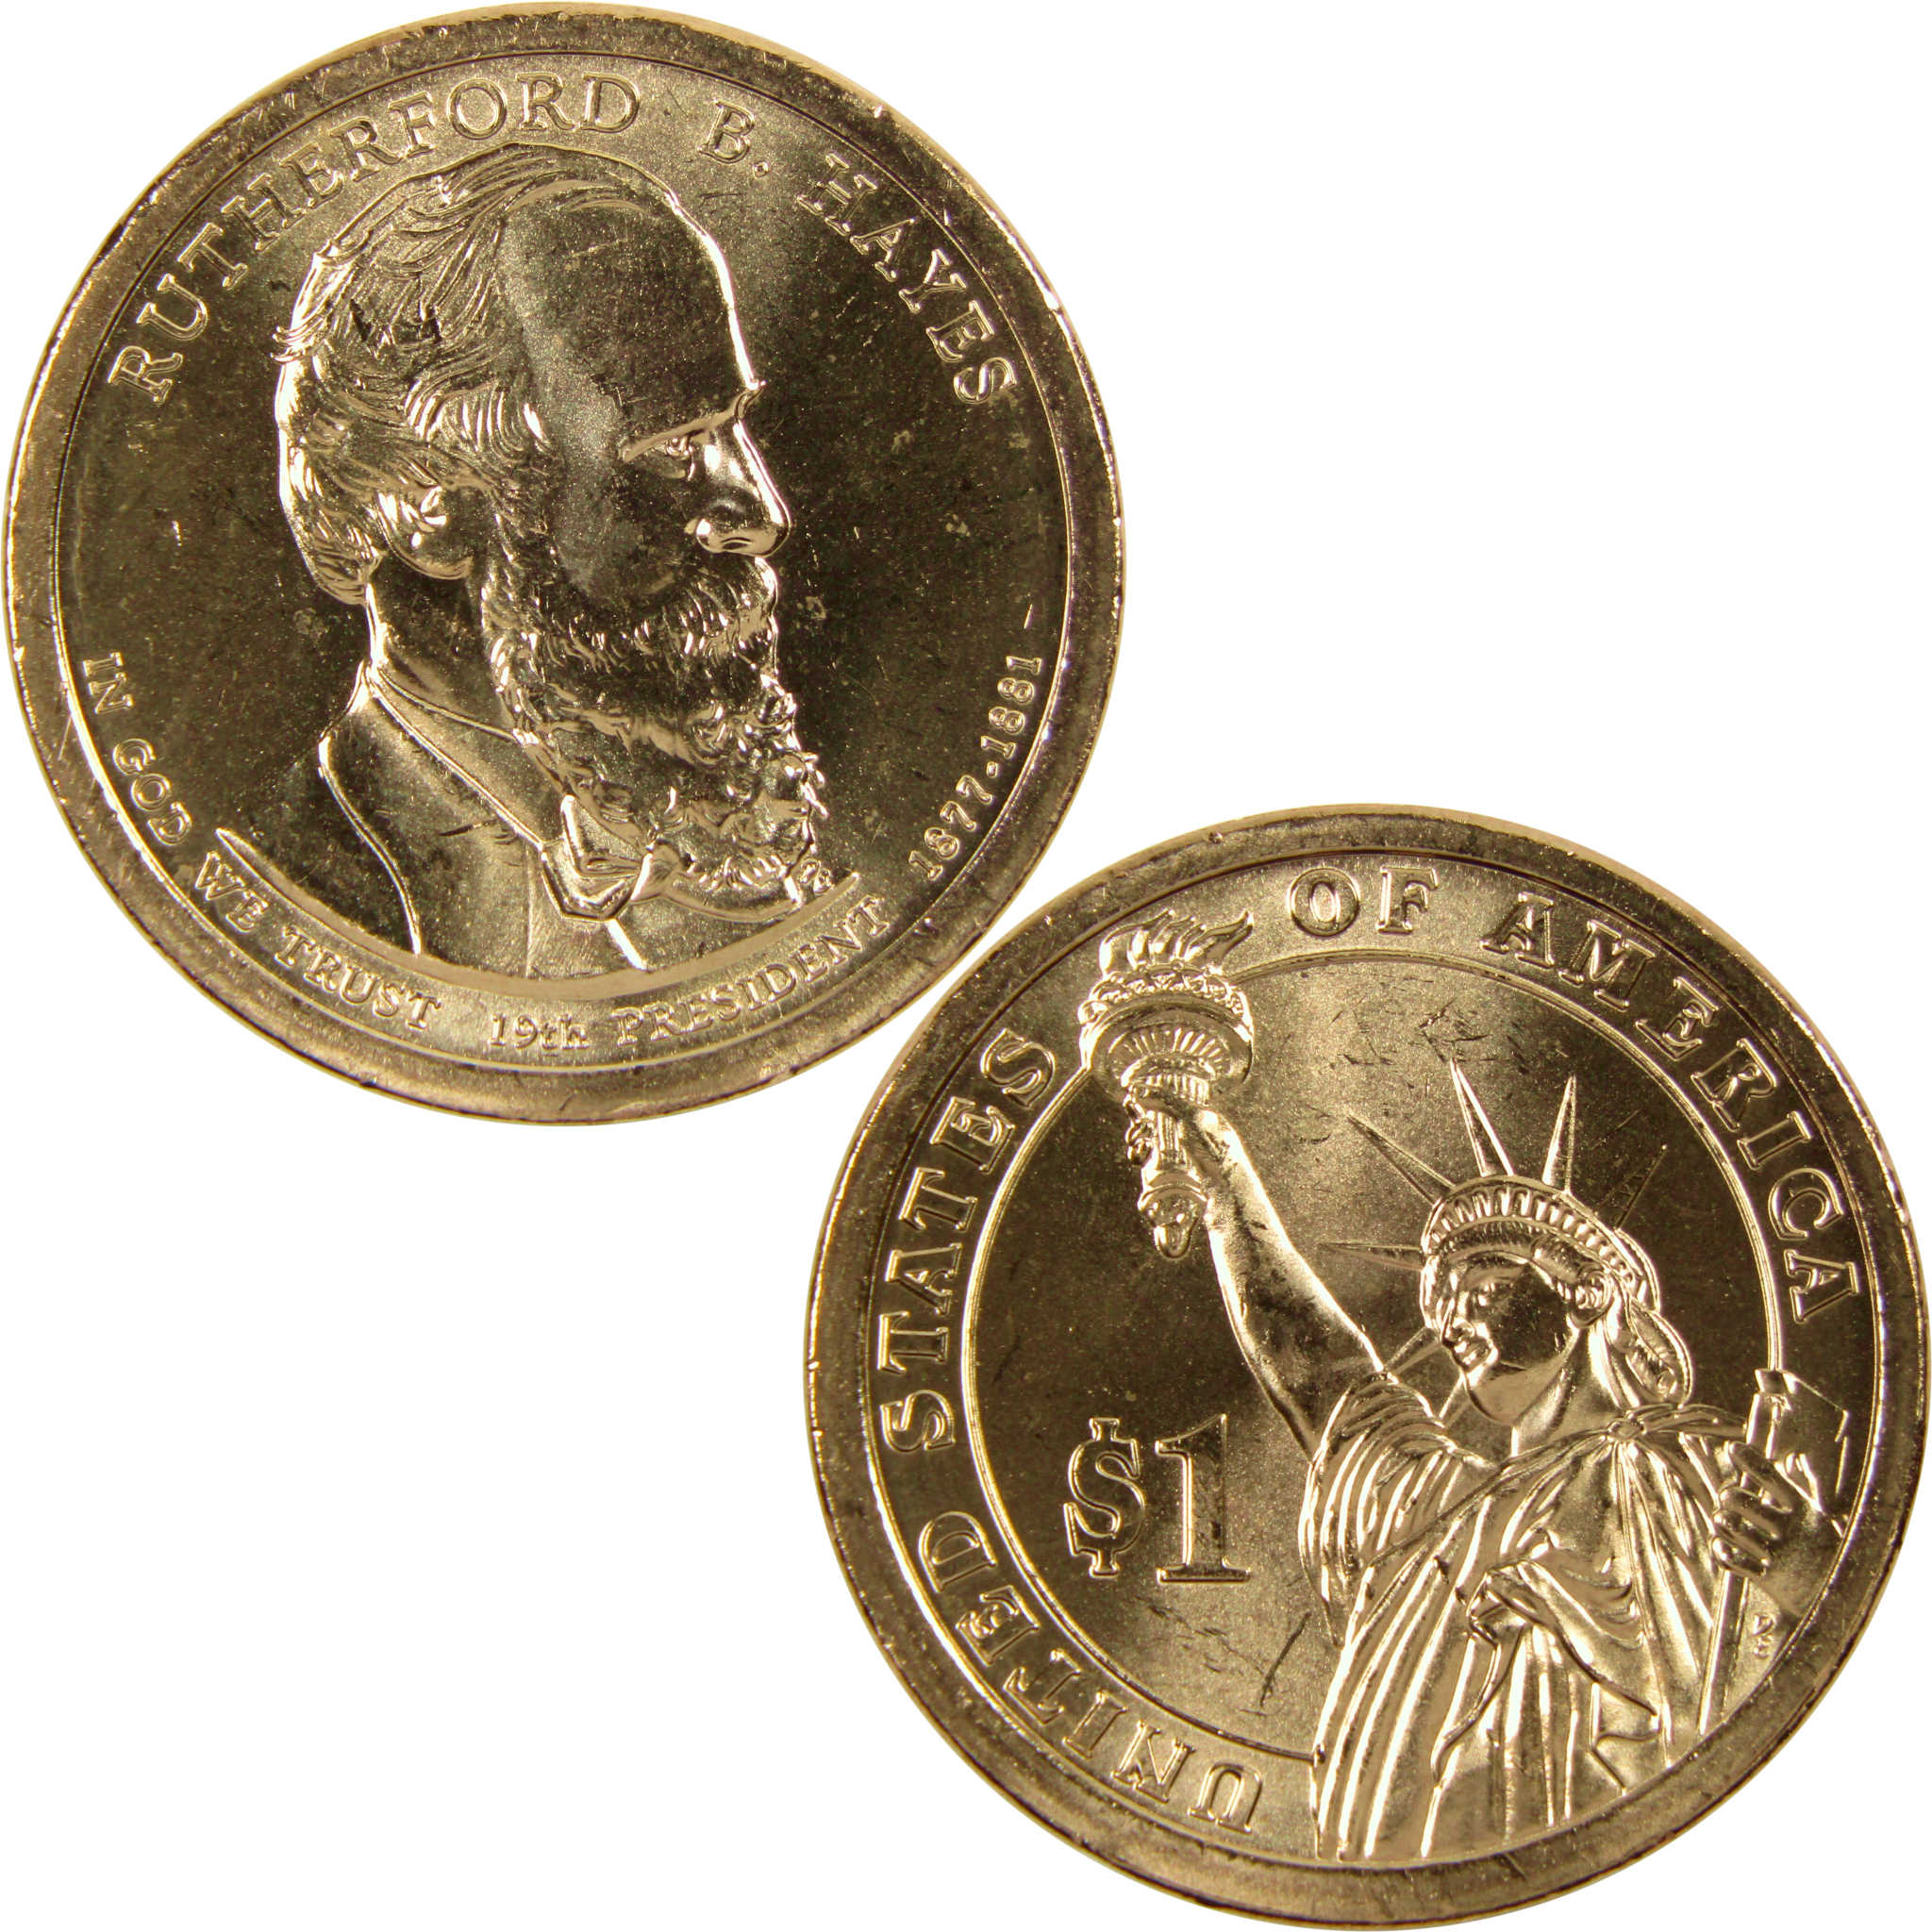 2011 P Rutherford B. Hayes Presidential Dollar BU Uncirculated $1 Coin